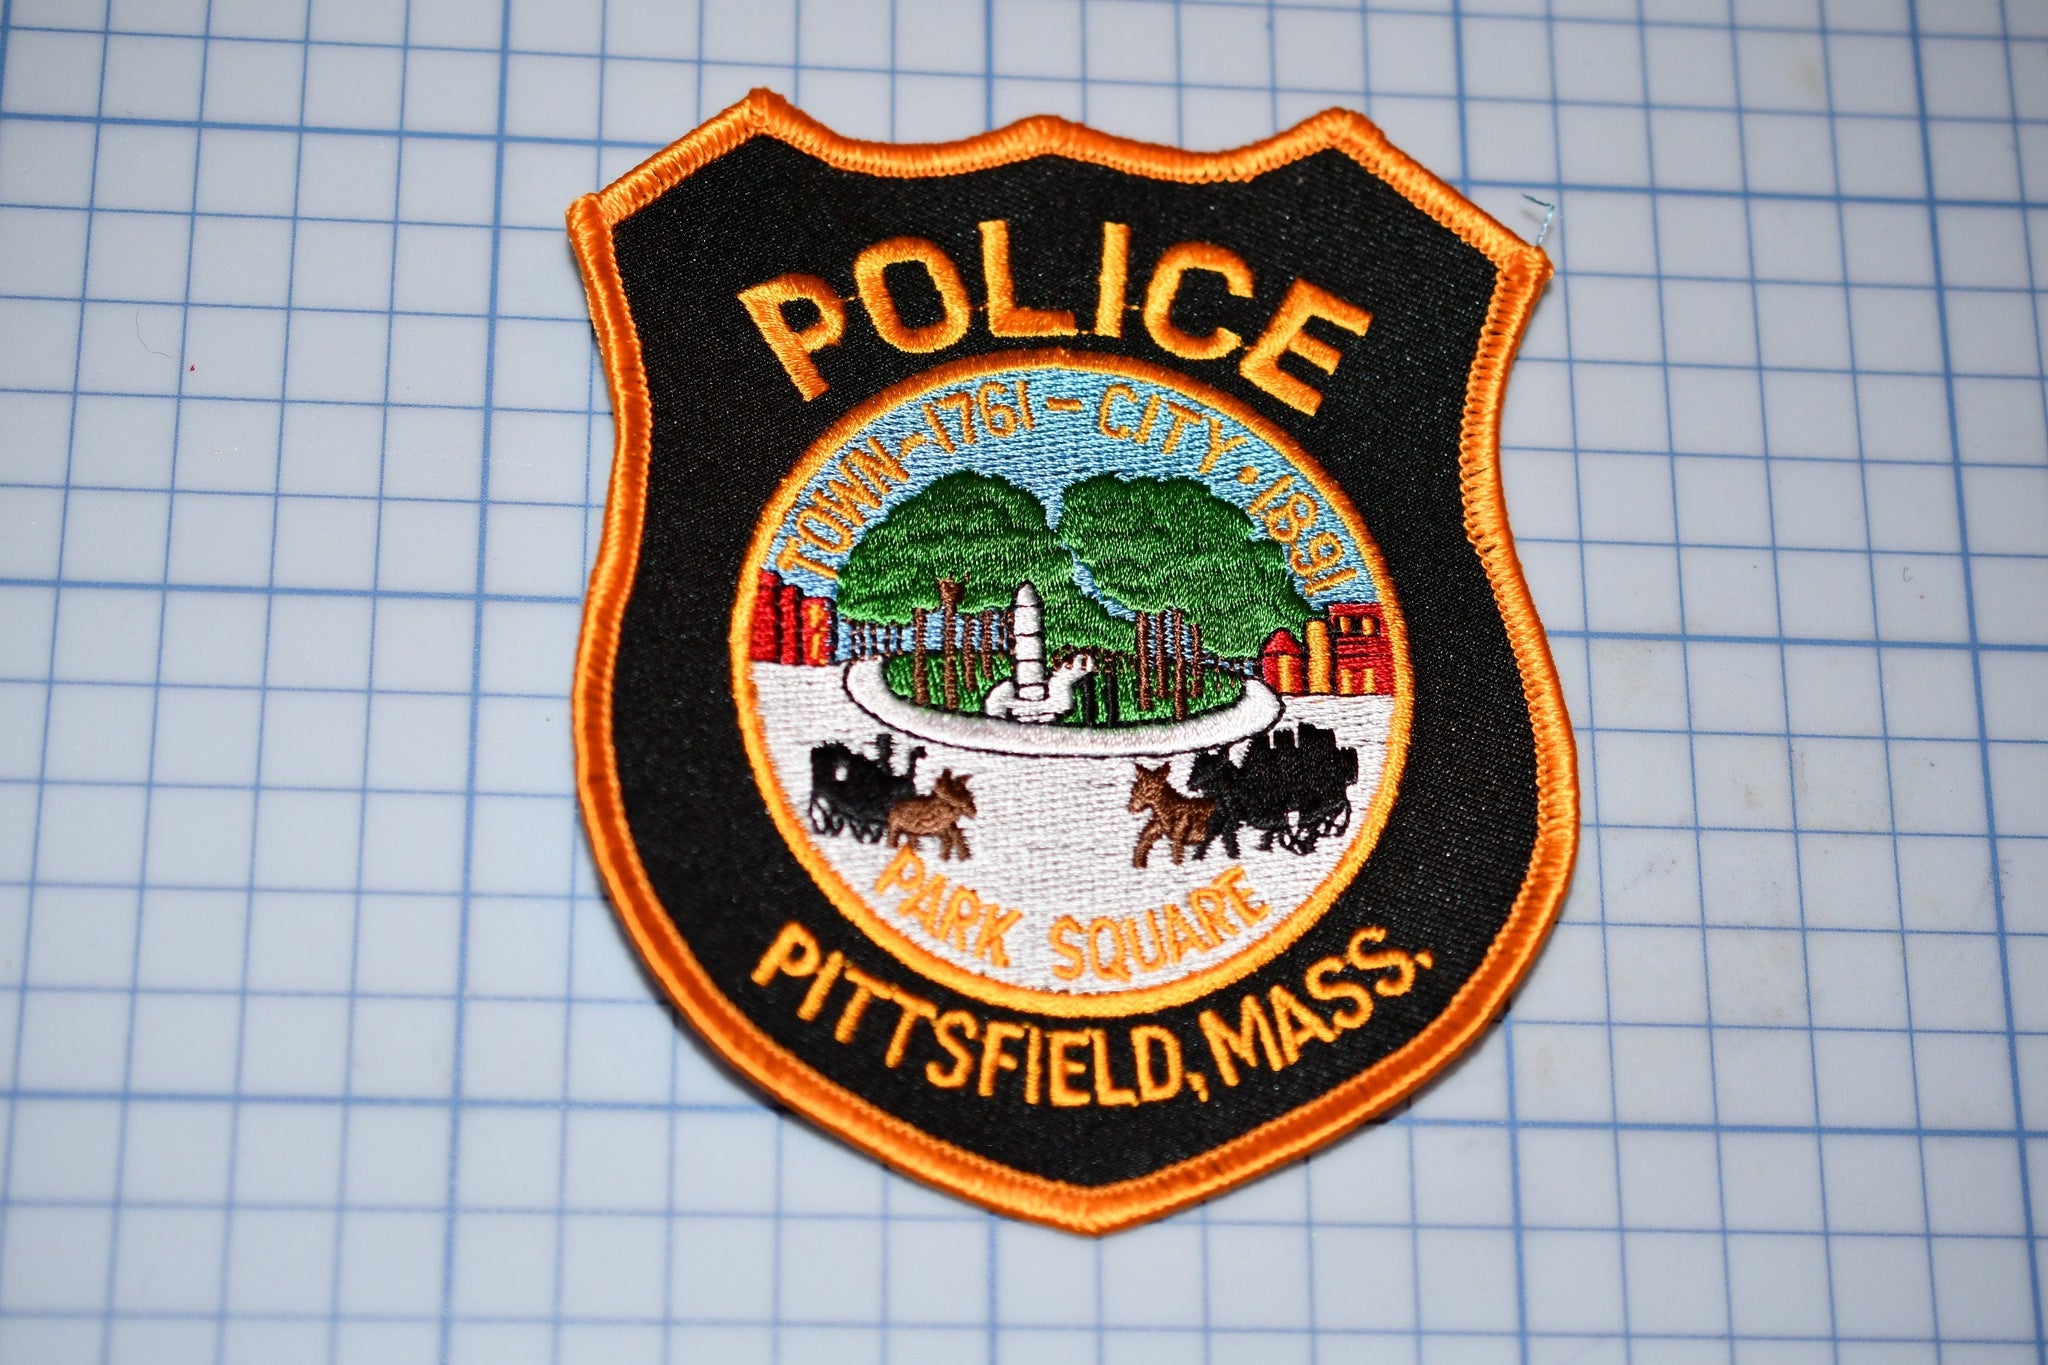 Pittsfield Massachusetts Police Patch (S3-265)